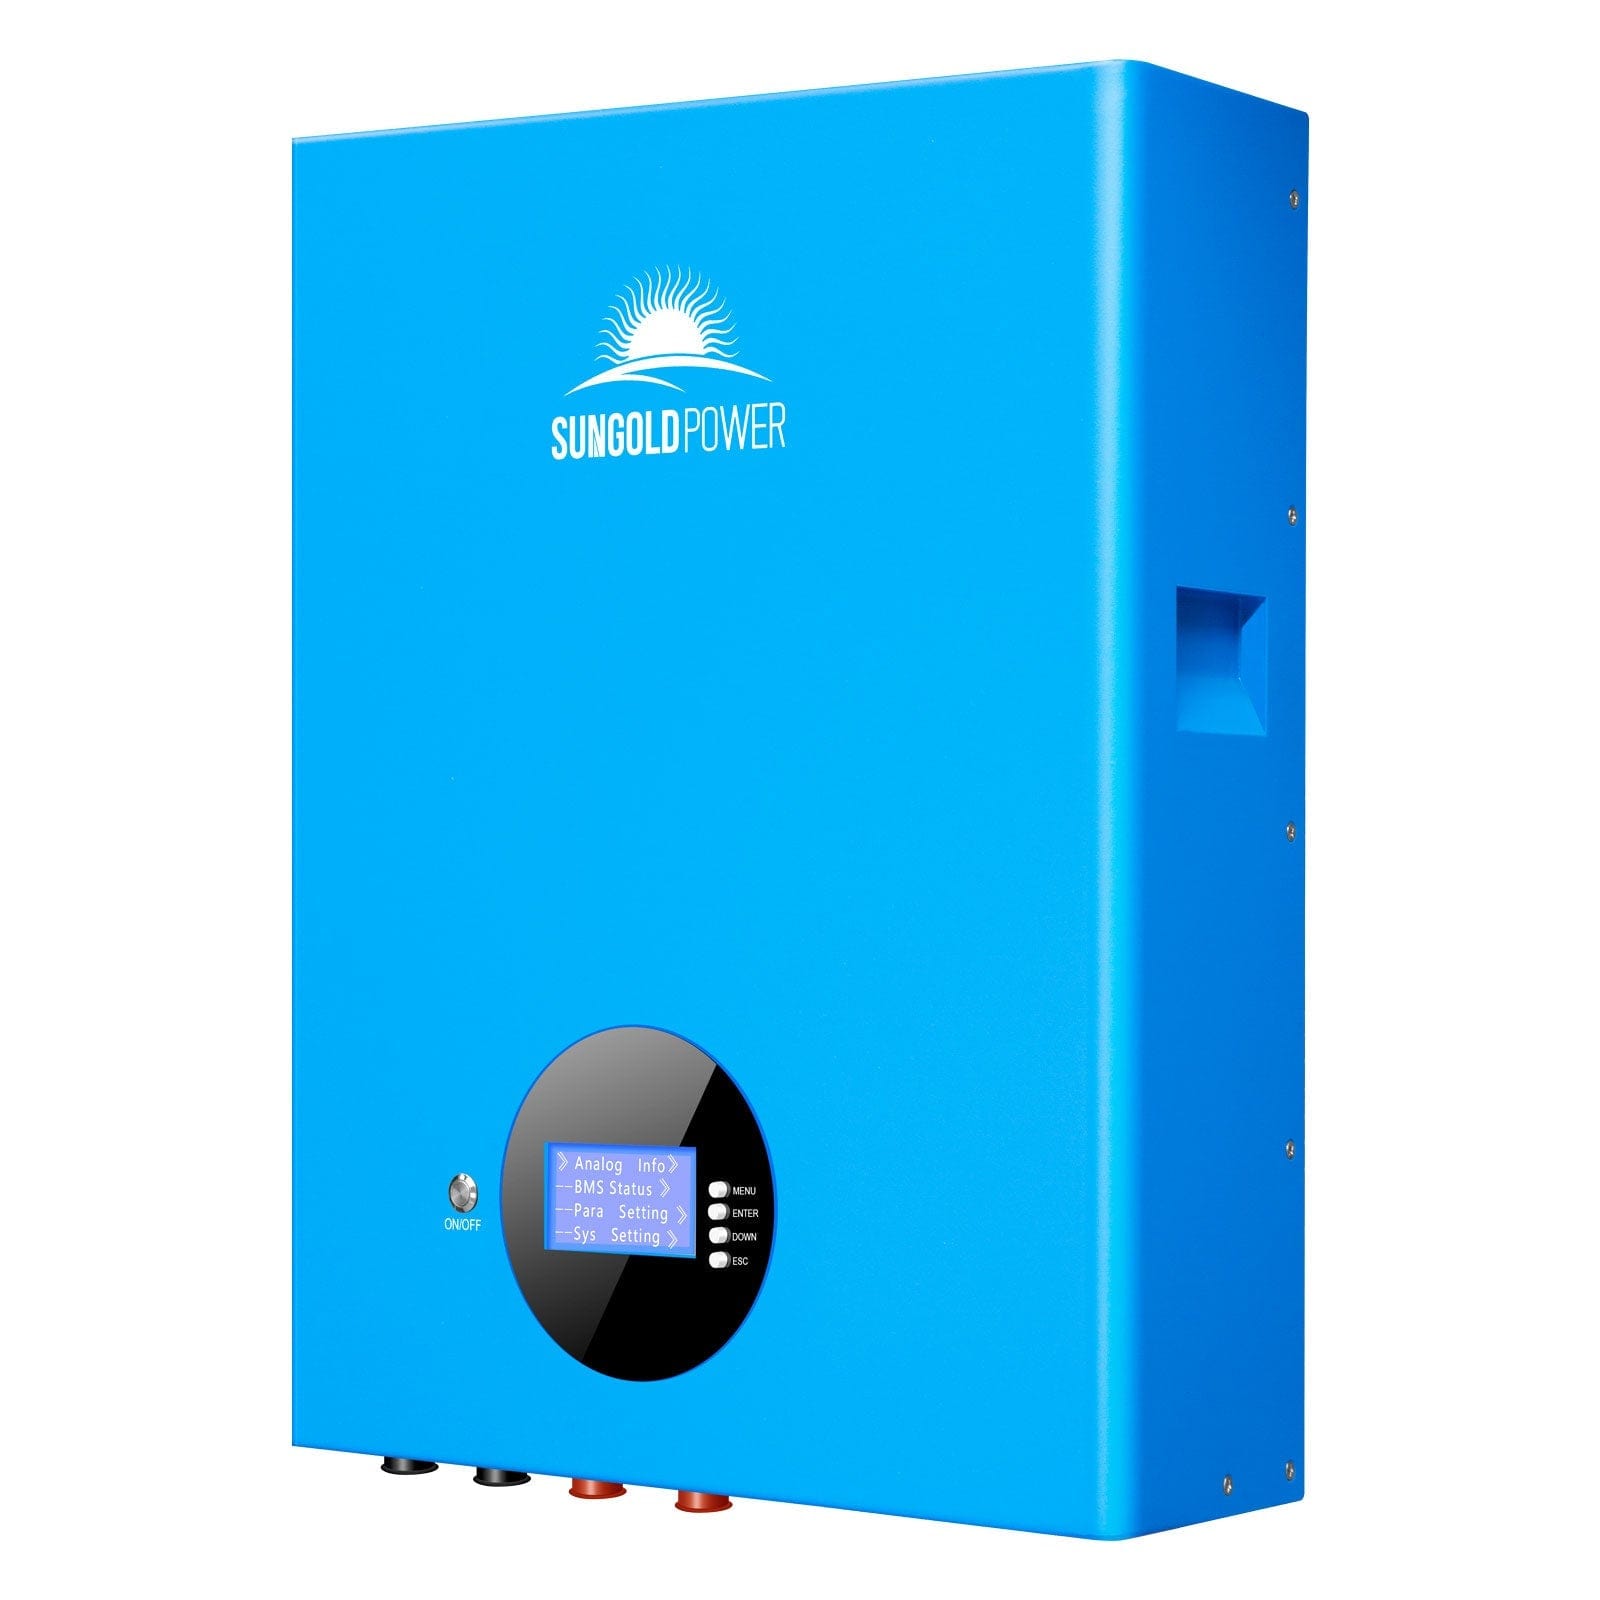 5.12KWH Powerwall LiFePO4 Lithium Battery SG48100M SunGoldPower Battery